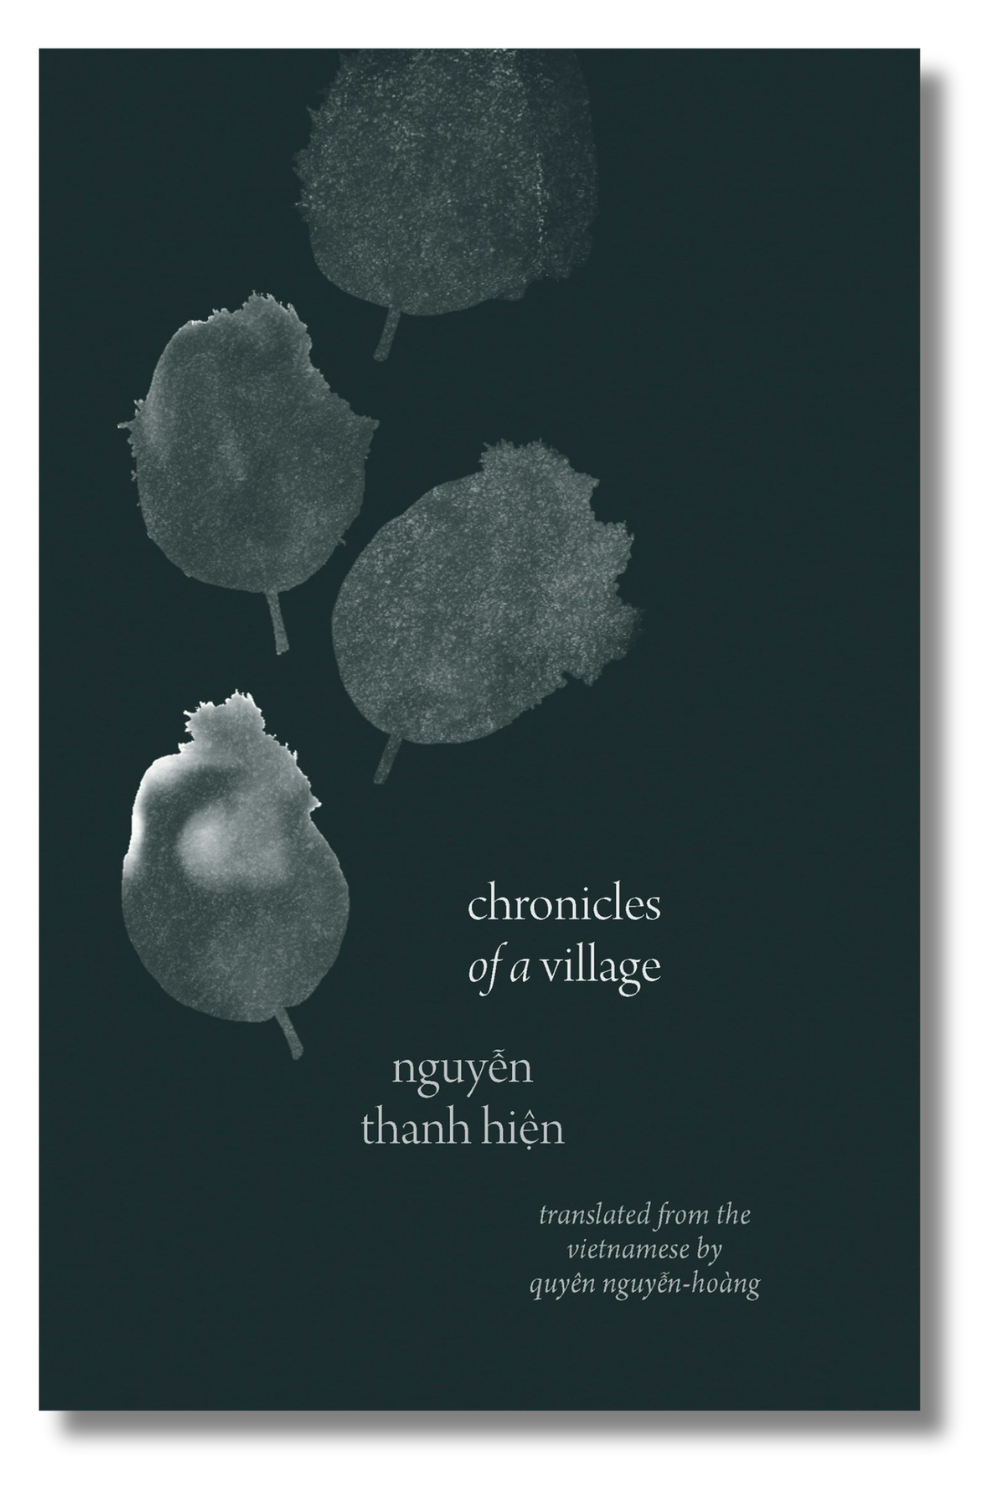 The cover of "Chronicles of a Village" by Nguyen Thanh Hien, tr. by Quyen Nguyen-Hoang